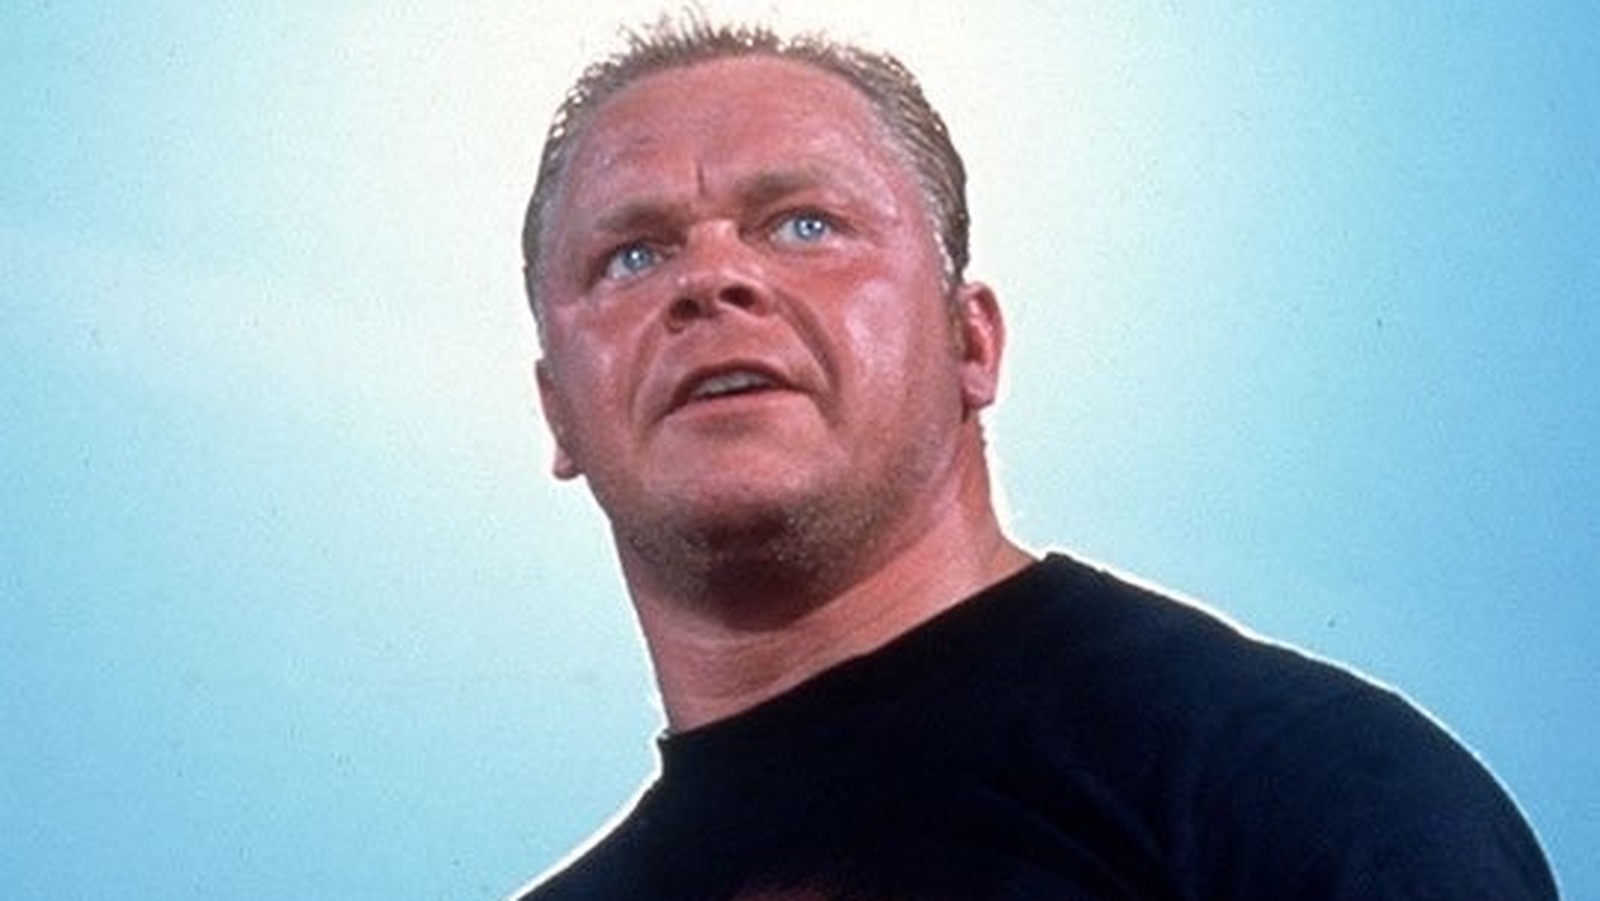 Shane Douglas Says ECW Doesn't Look Dated, While The WWF And WCW From The Same Era Does